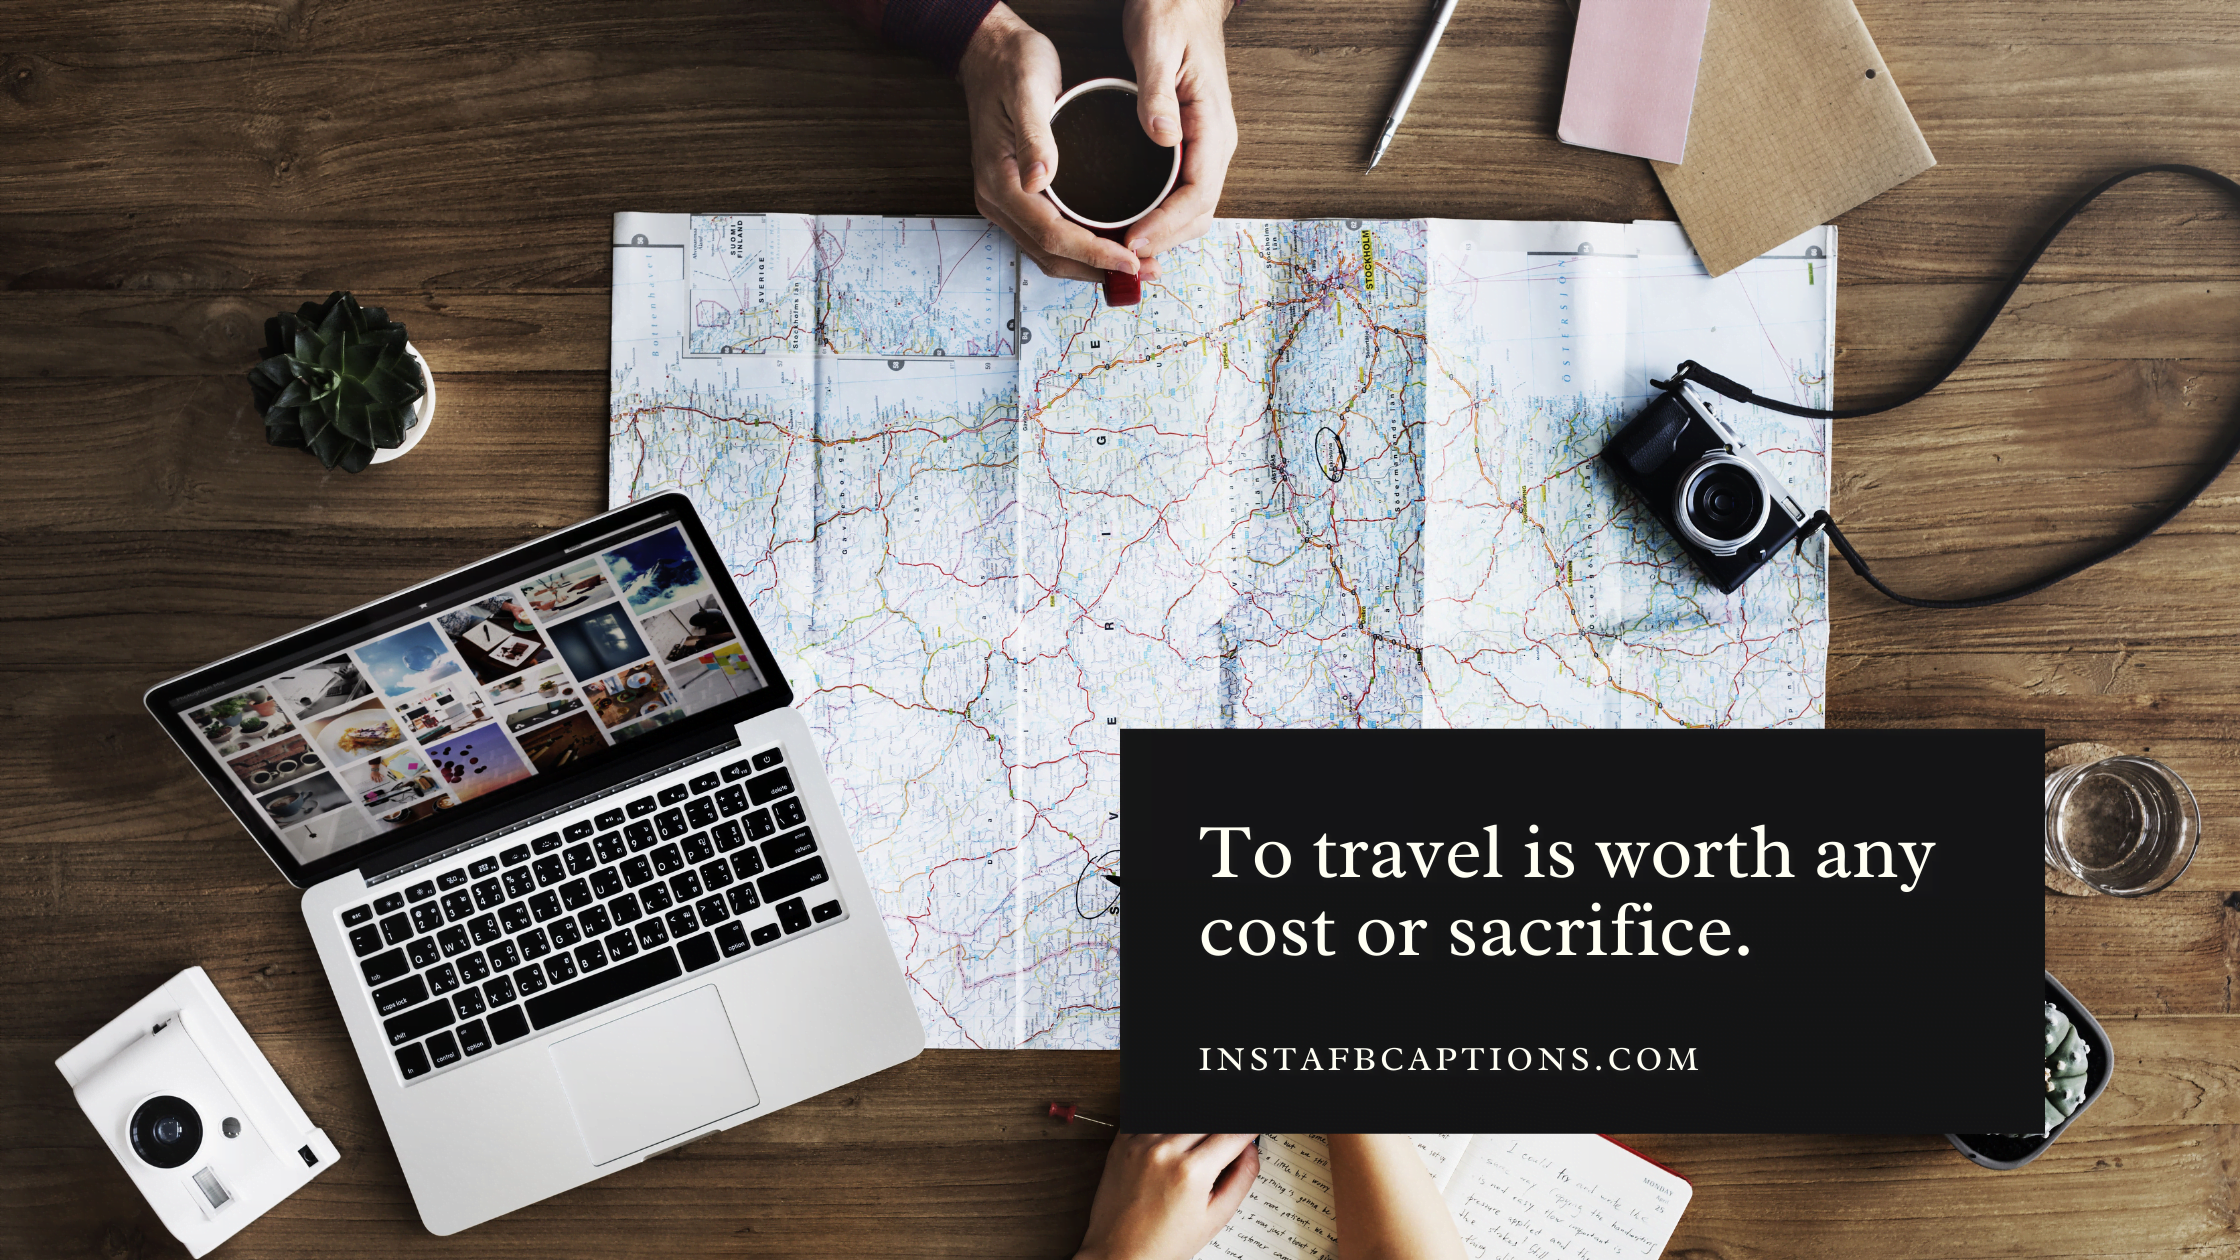 To travel is worth any cost or sacrifice  - Travel Quote Captions - [New] Travel Captions For Travelling Instagram Reels in 2023